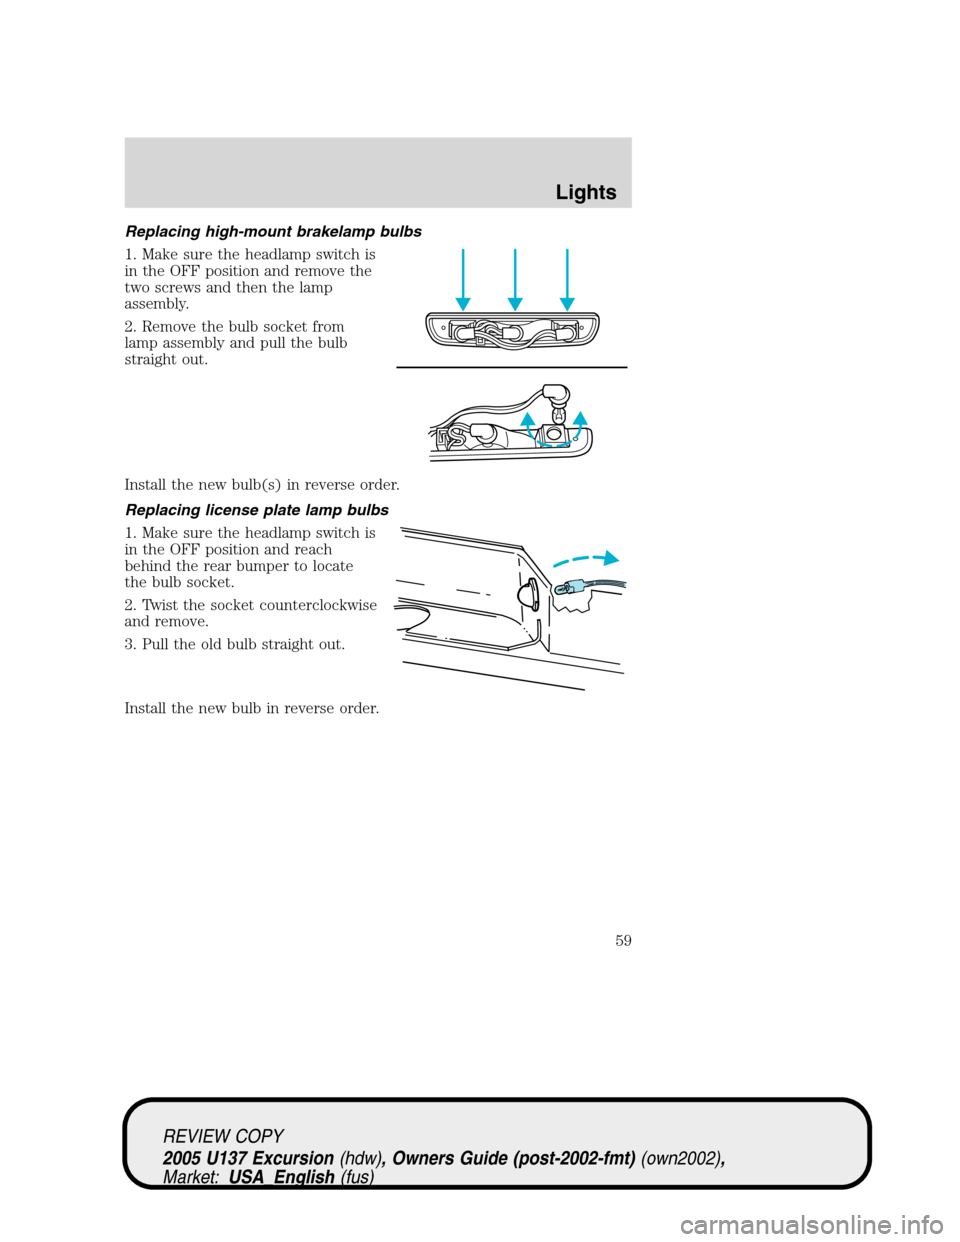 FORD EXCURSION 2005 1.G User Guide Replacing high-mount brakelamp bulbs
1. Make sure the headlamp switch is
in the OFF position and remove the
two screws and then the lamp
assembly.
2. Remove the bulb socket from
lamp assembly and pull